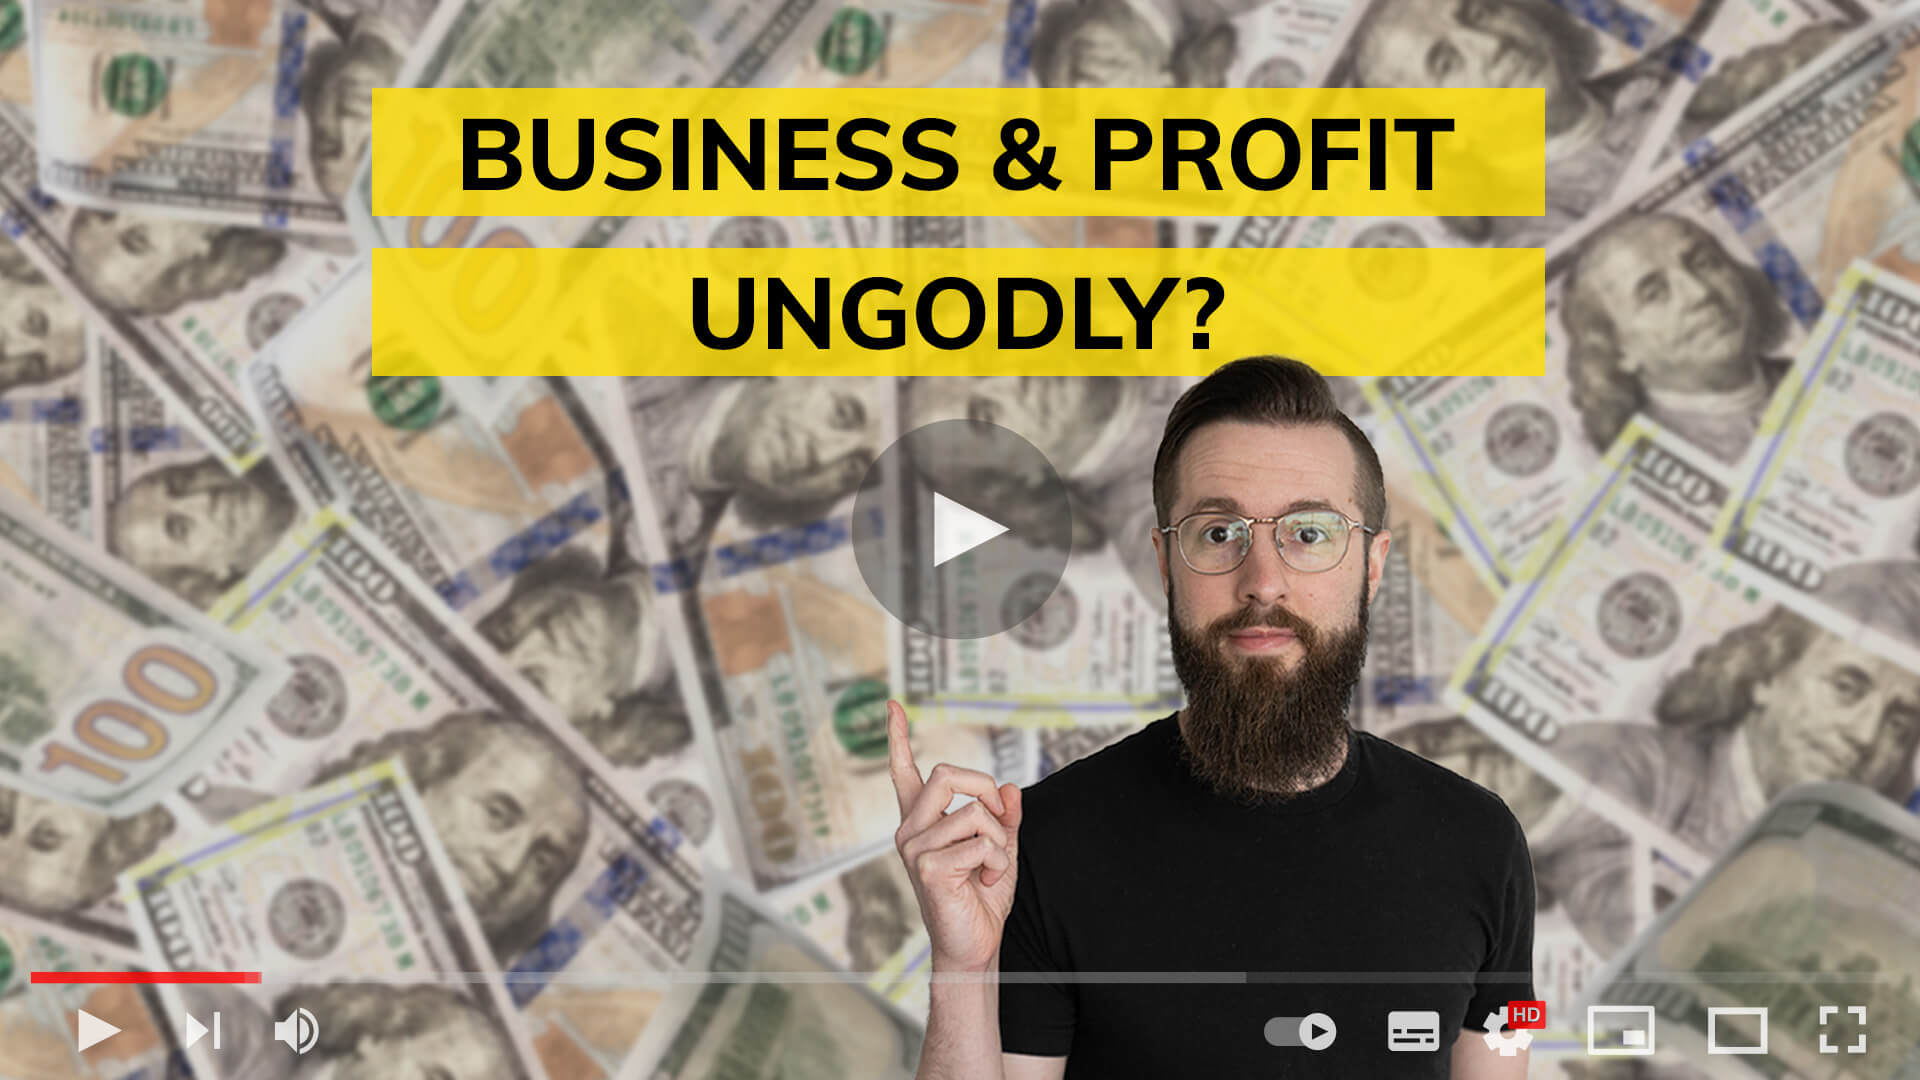 Business & Profit Ungodly?